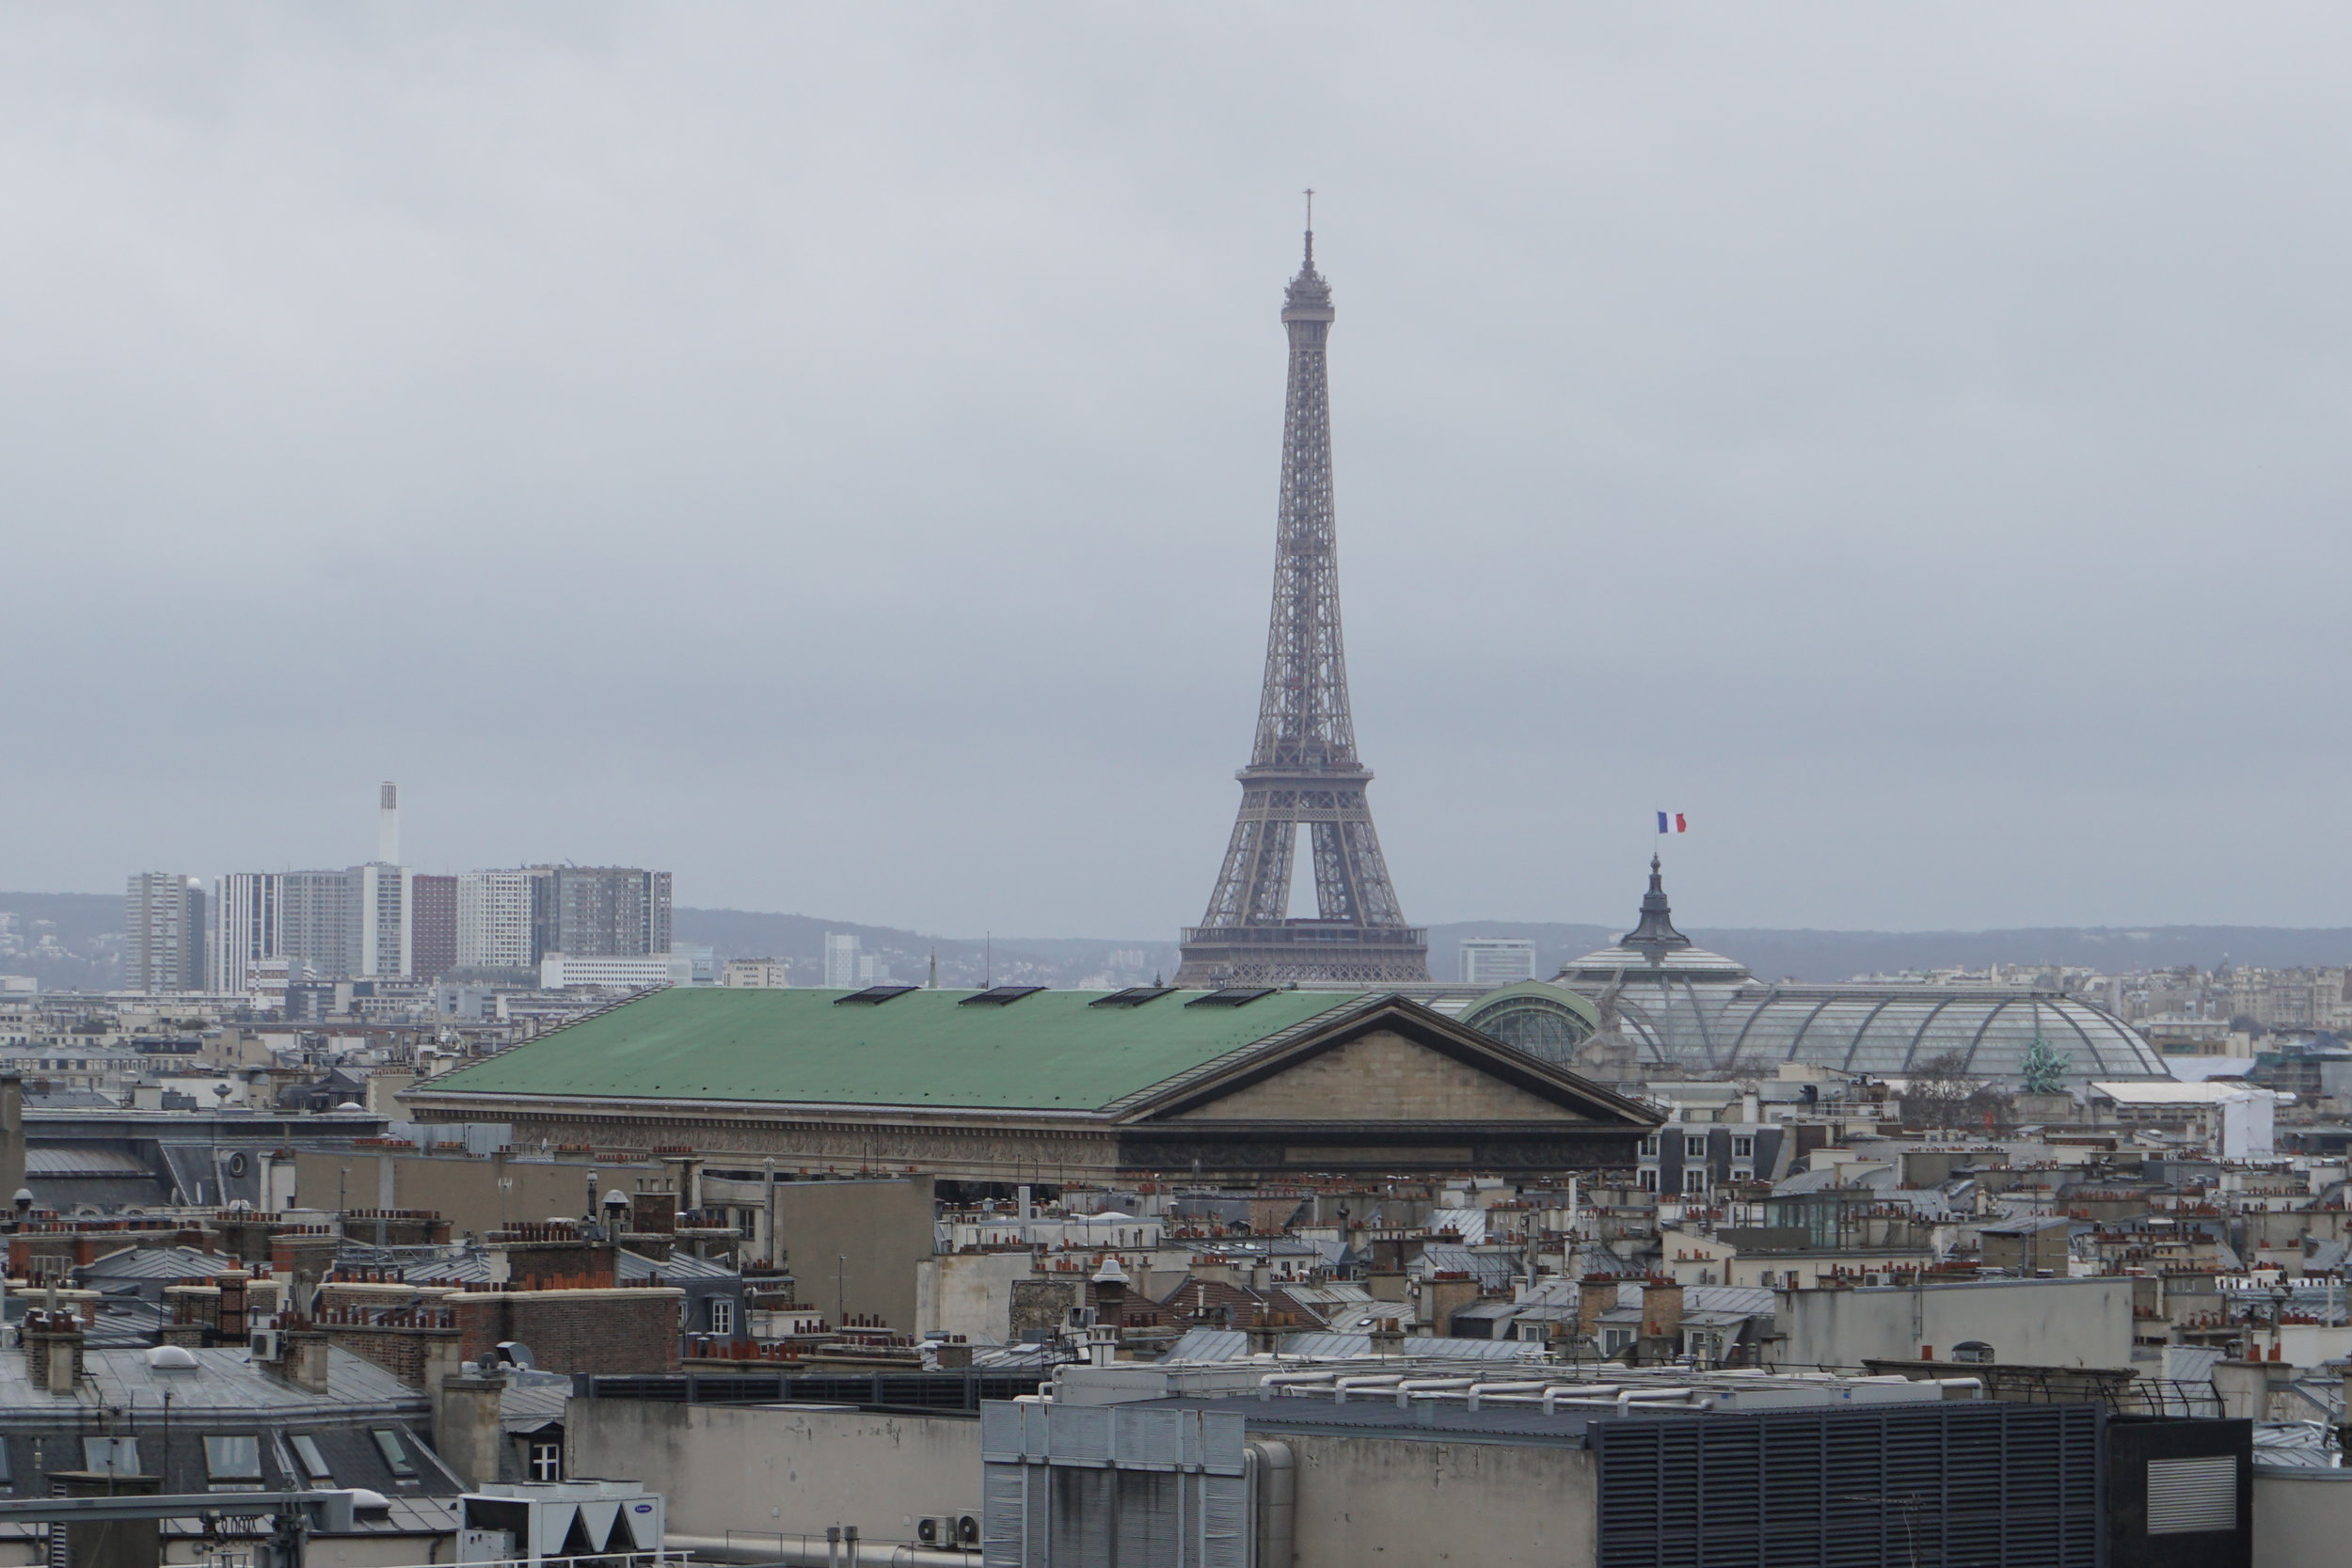  Eiffel Tower from roof  